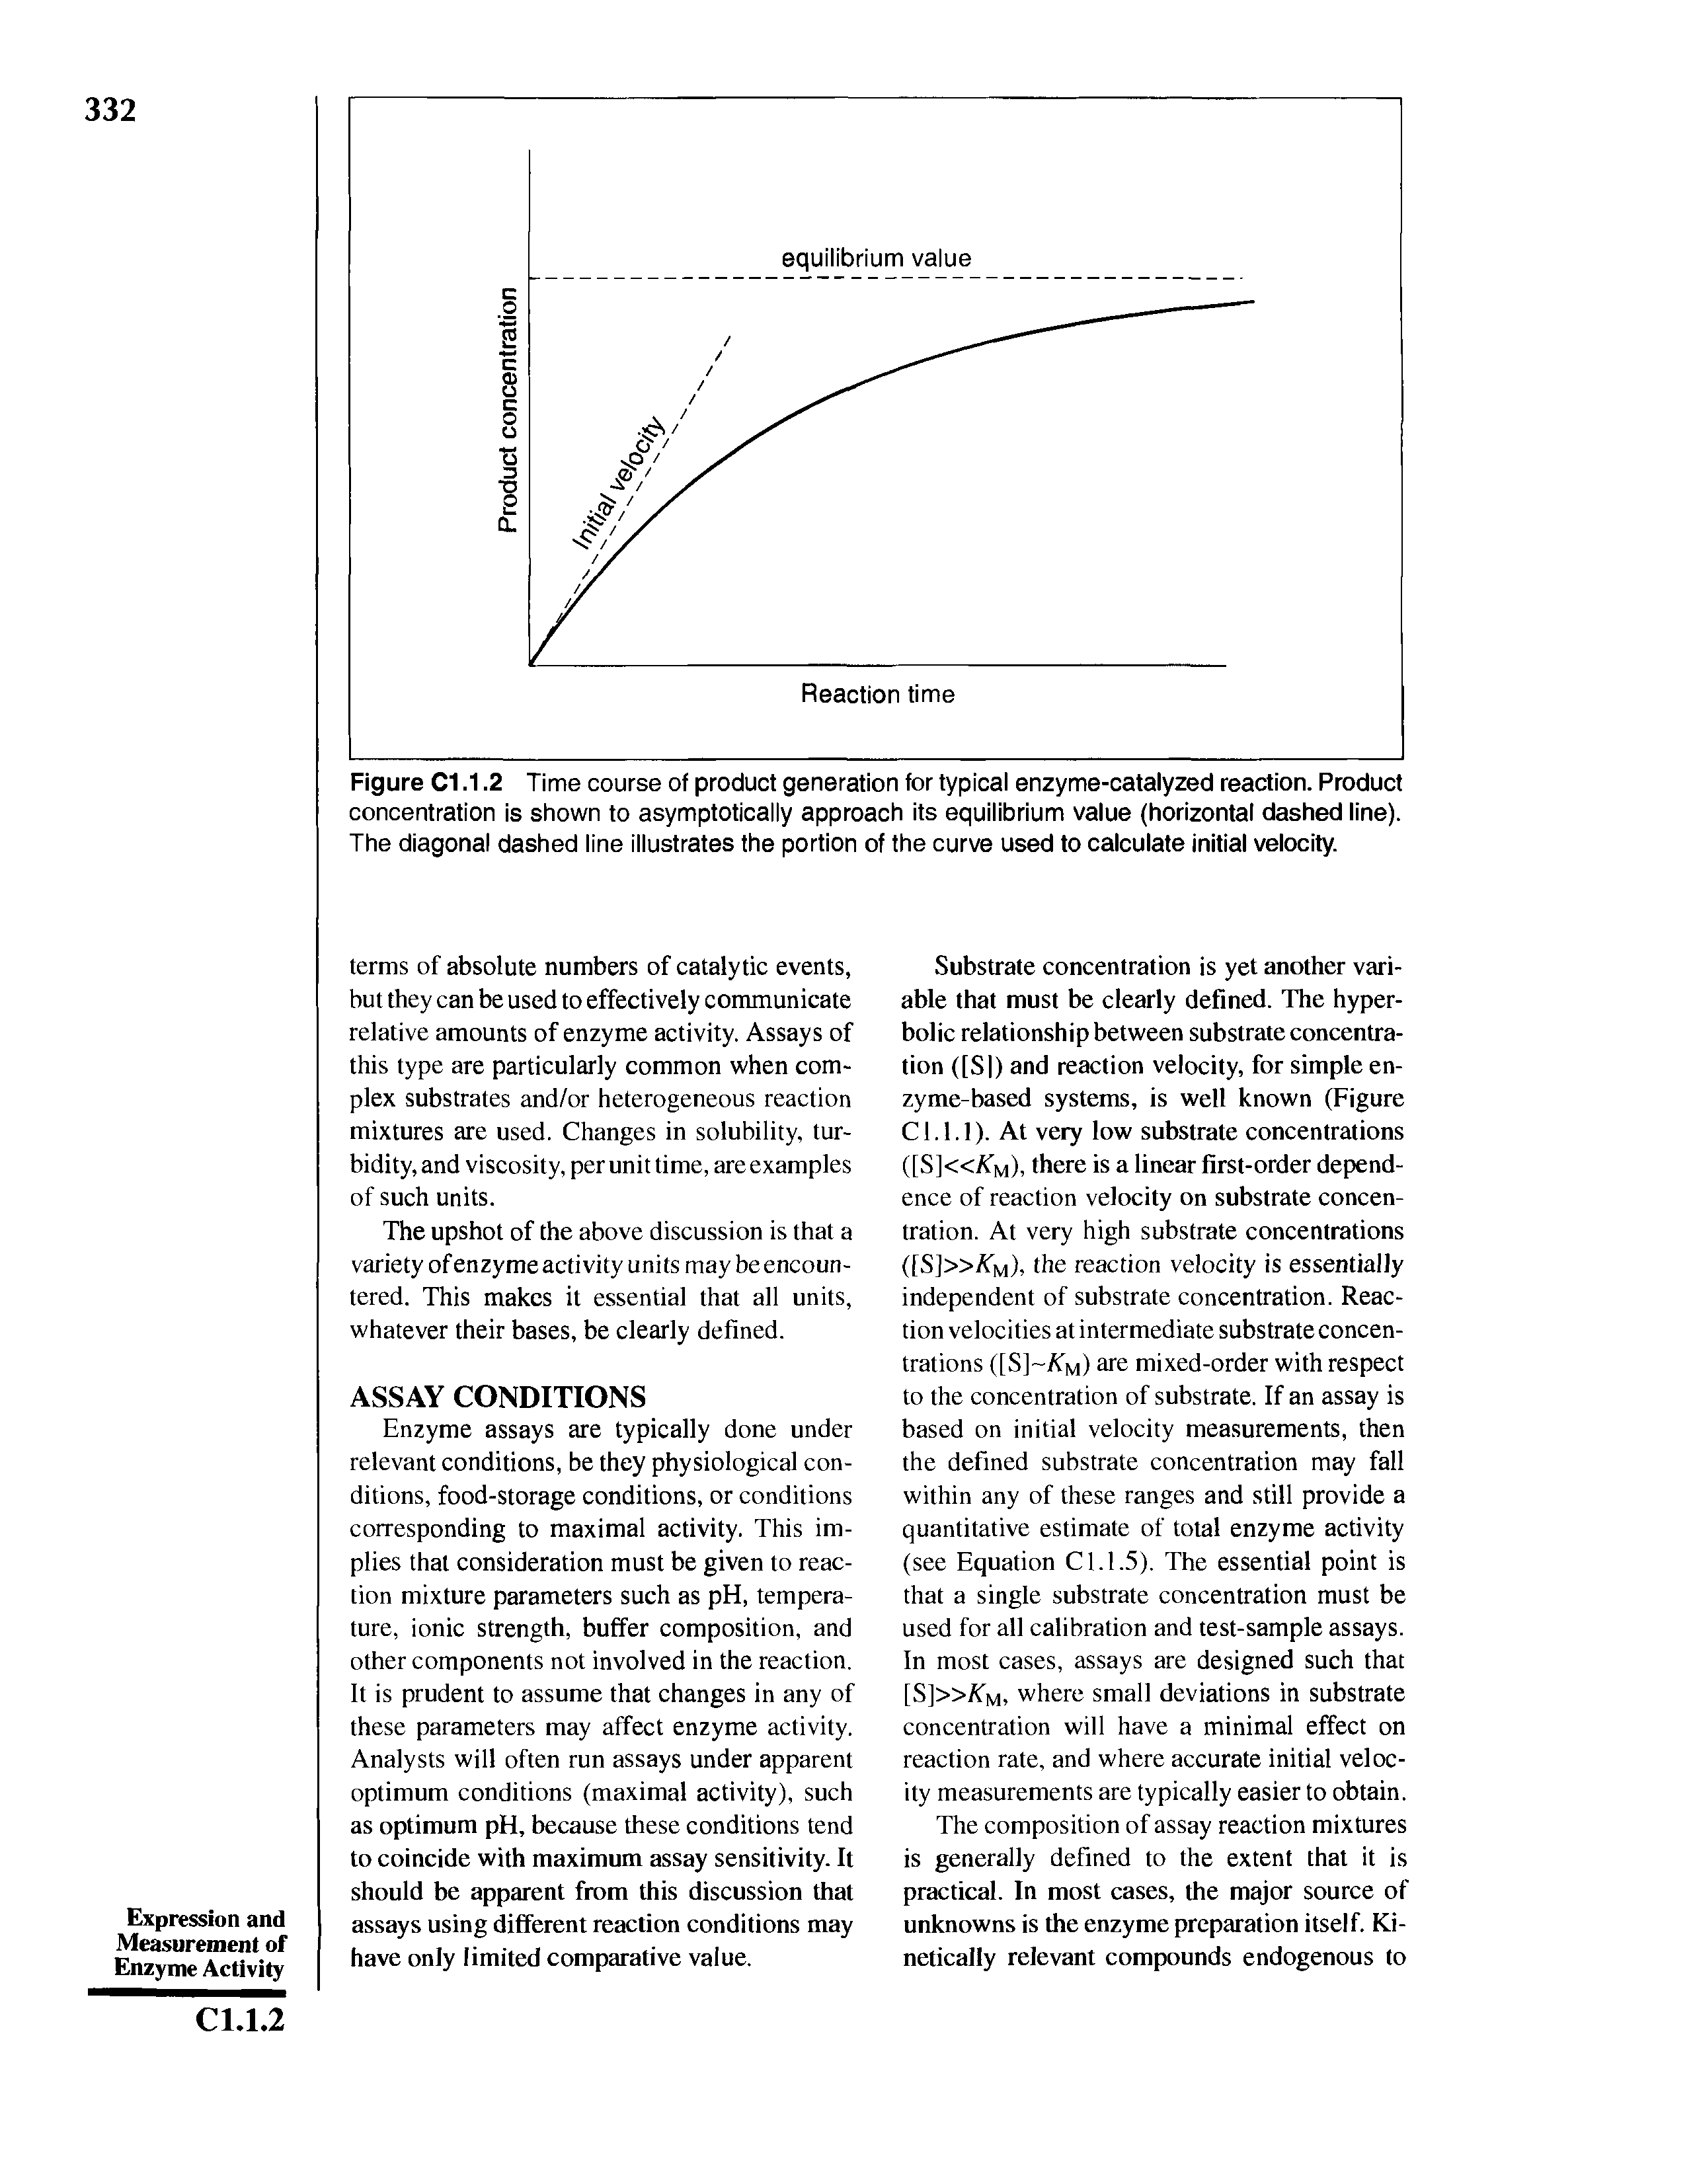 Figure C1.1.2 Time course of product generation for typical enzyme-catalyzed reaction. Product concentration is shown to asymptotically approach its equilibrium value (horizontal dashed line). The diagonal dashed line illustrates the portion of the curve used to calculate initial velocity.